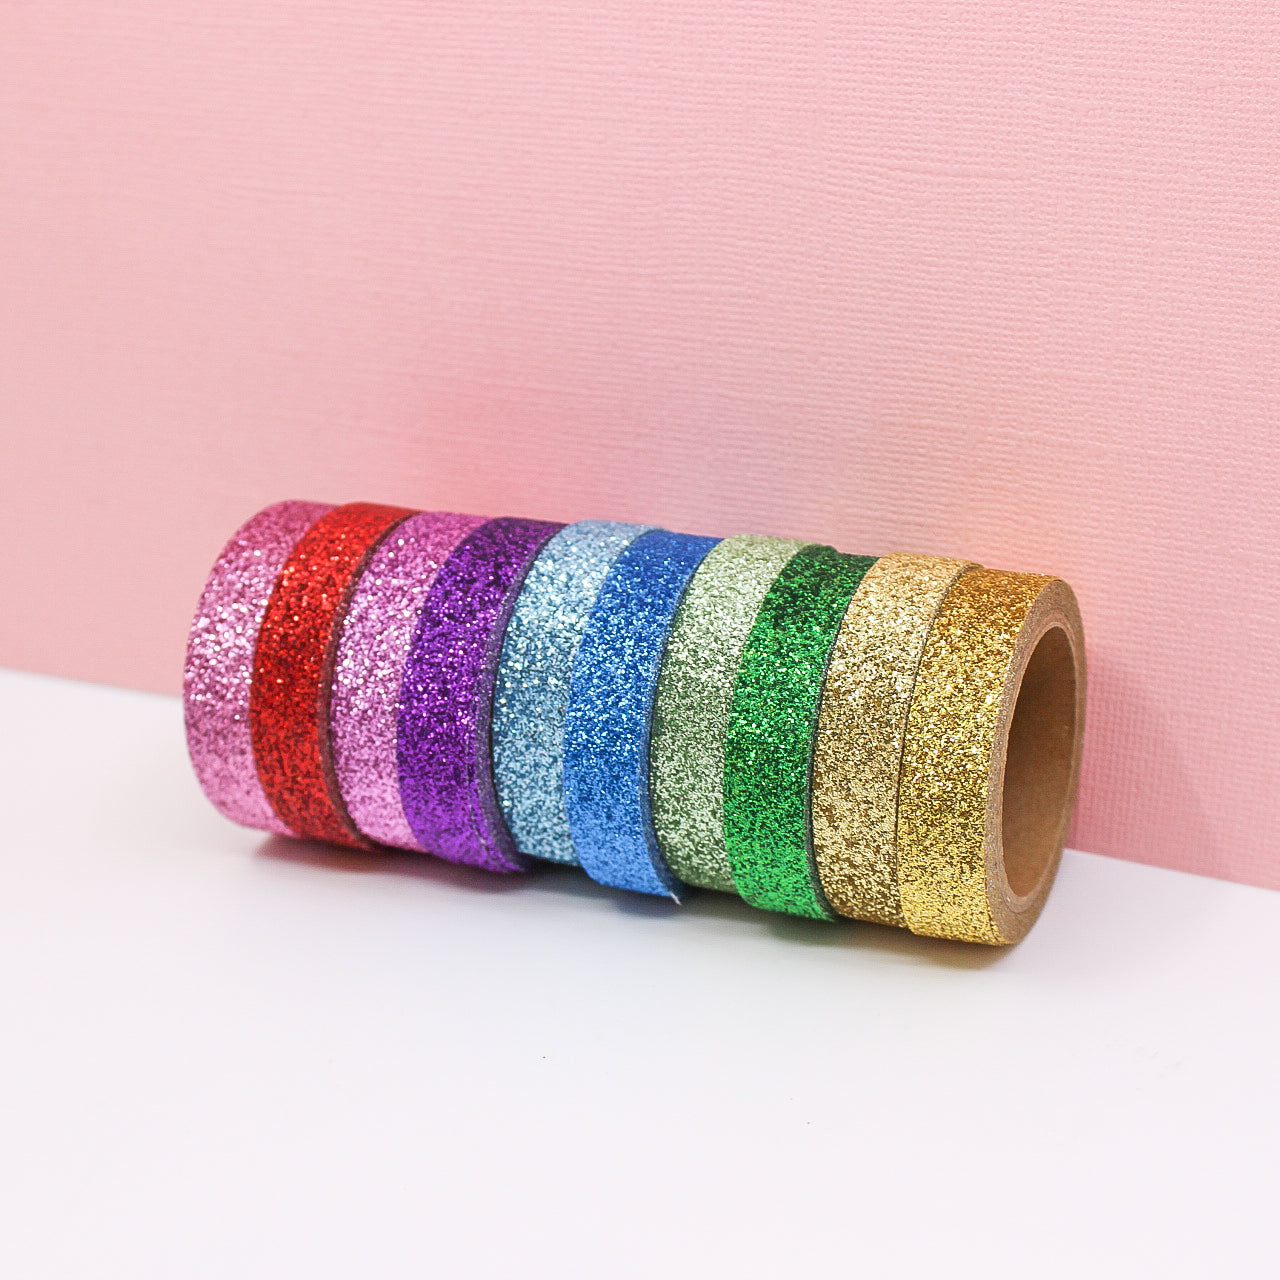 Wholesale Rainbow Laser Washi Highlighter Tape Set Glittery Stationery,  Scrapbooking, DIY, Masking Highlighter Tape, School Supplies T200229 2016  From Xue10, $2.45